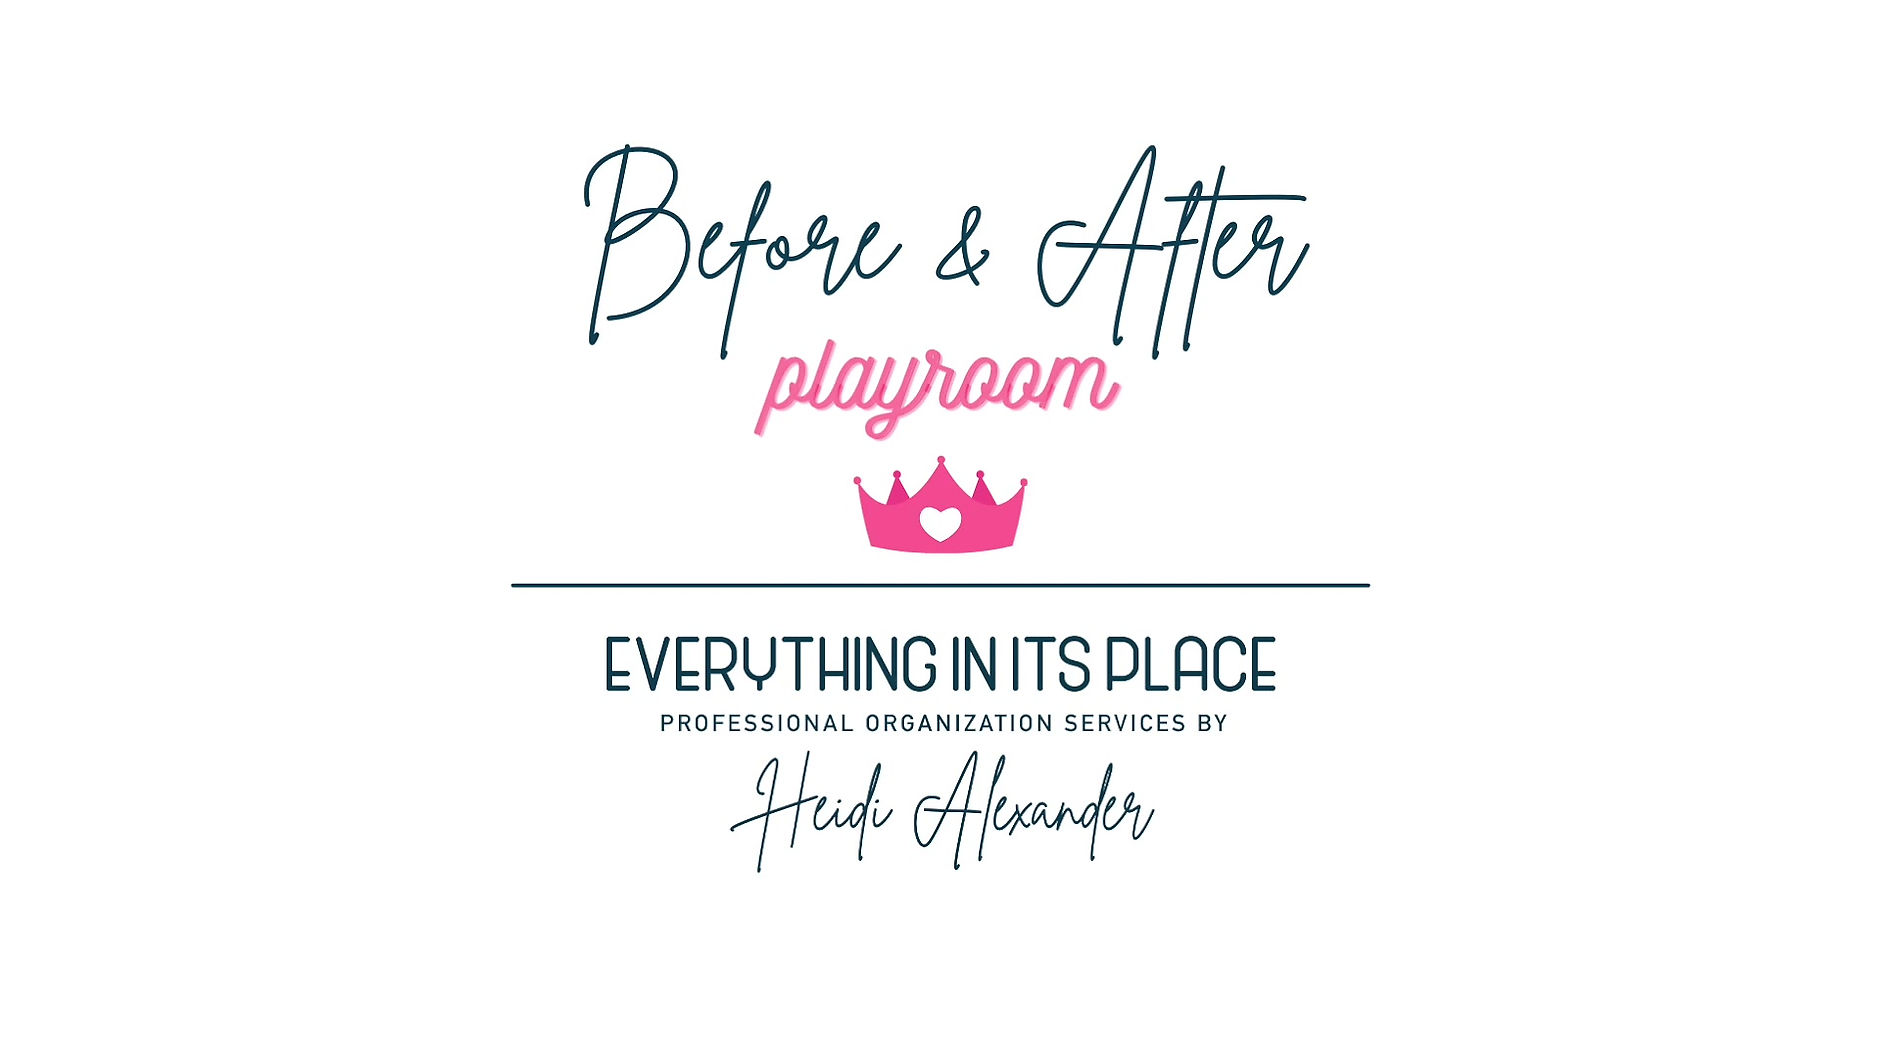 Playroom - Before & After Video